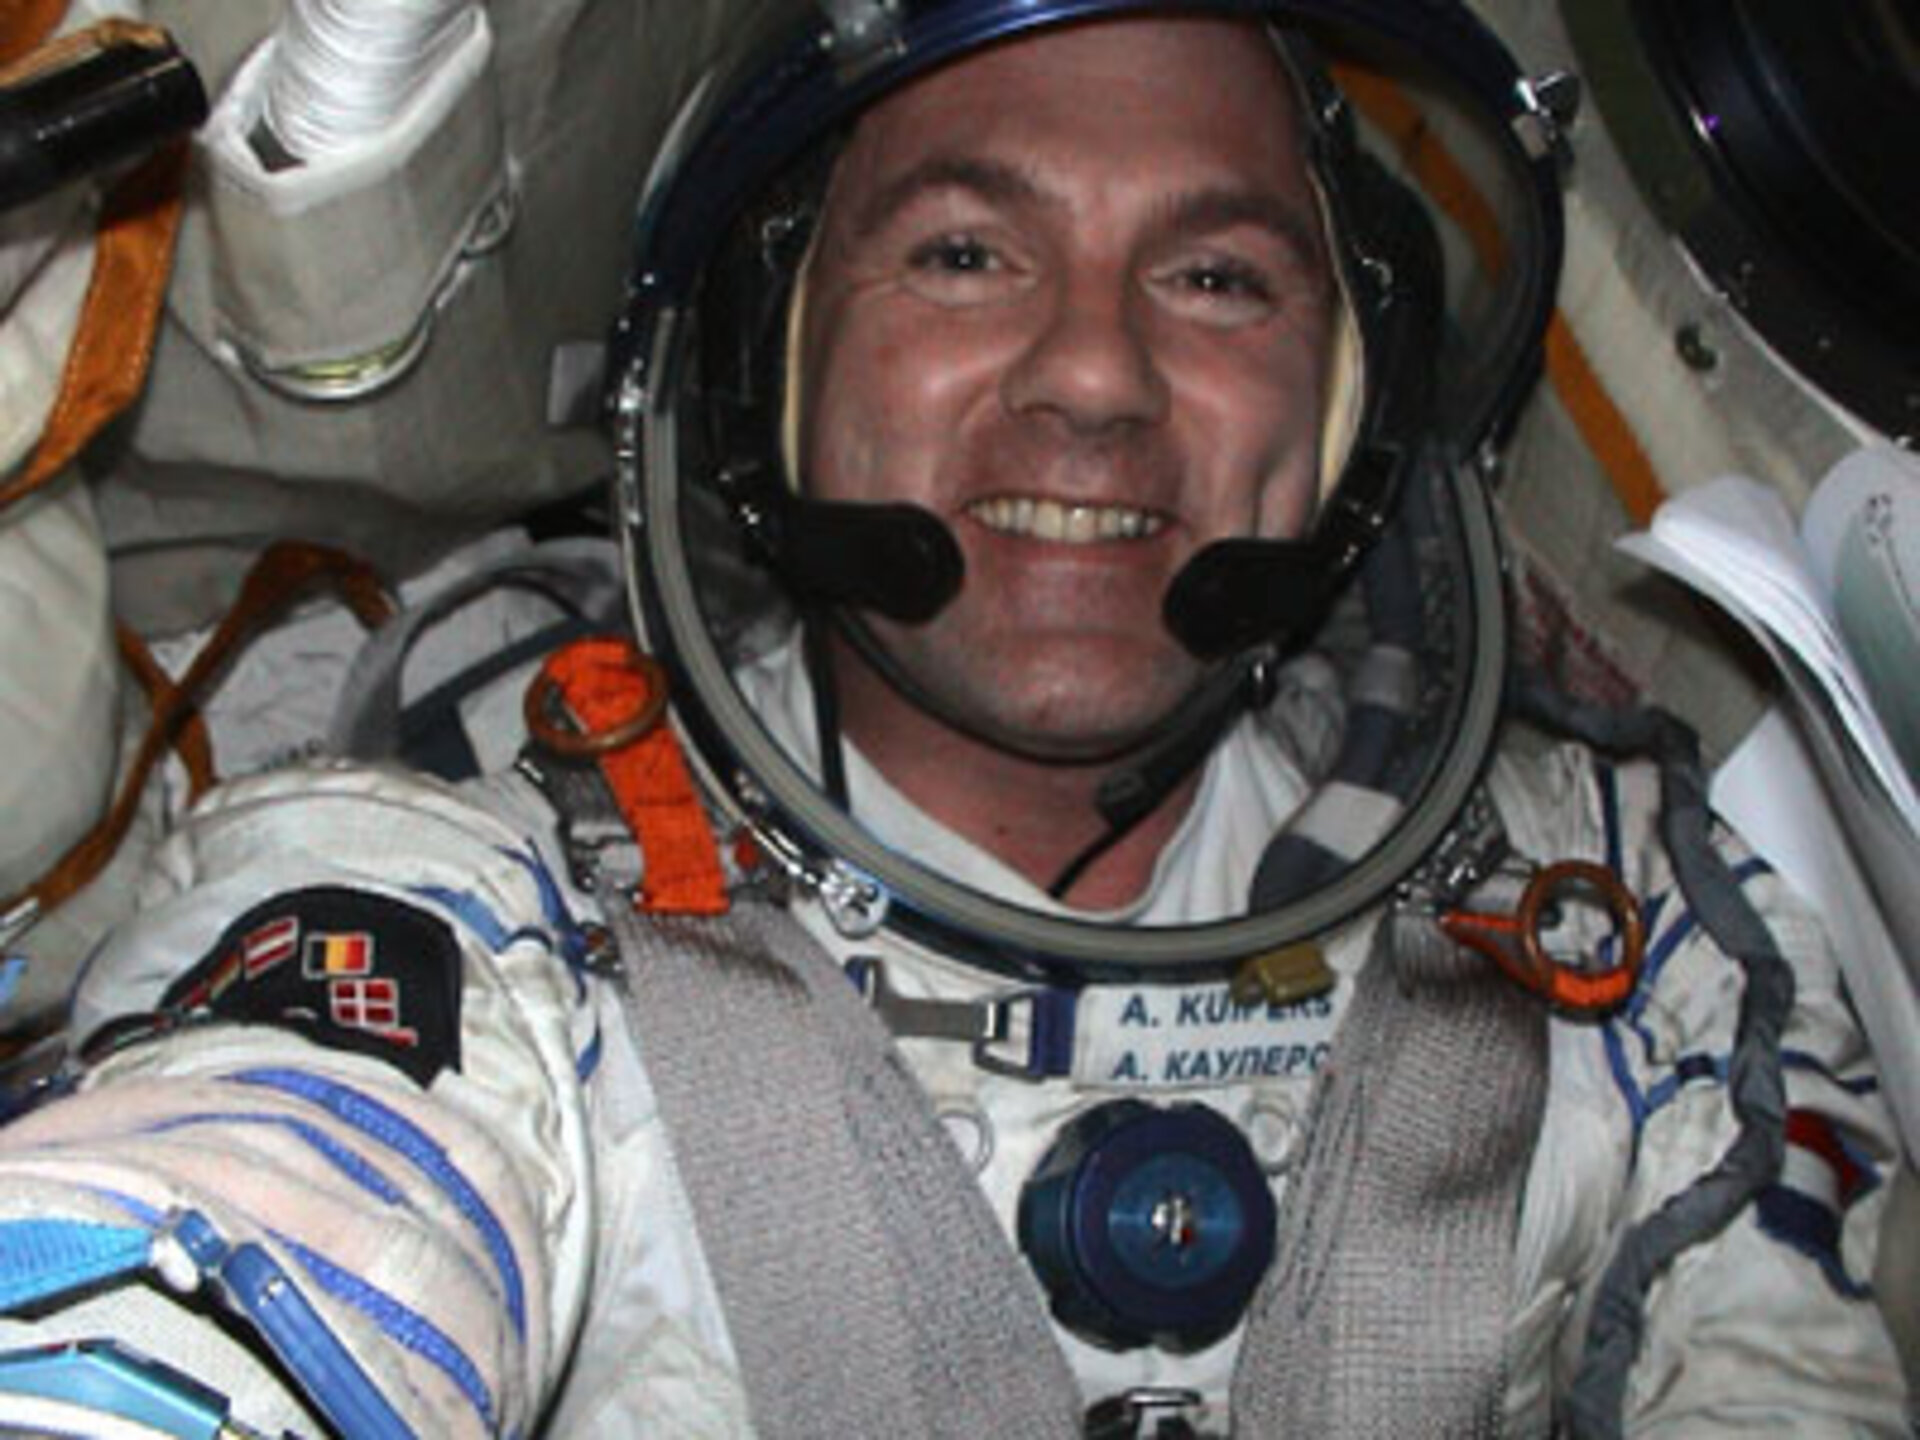 ESA astronaut André Kuipers in the Soyuz capsule whilst waiting for the launch